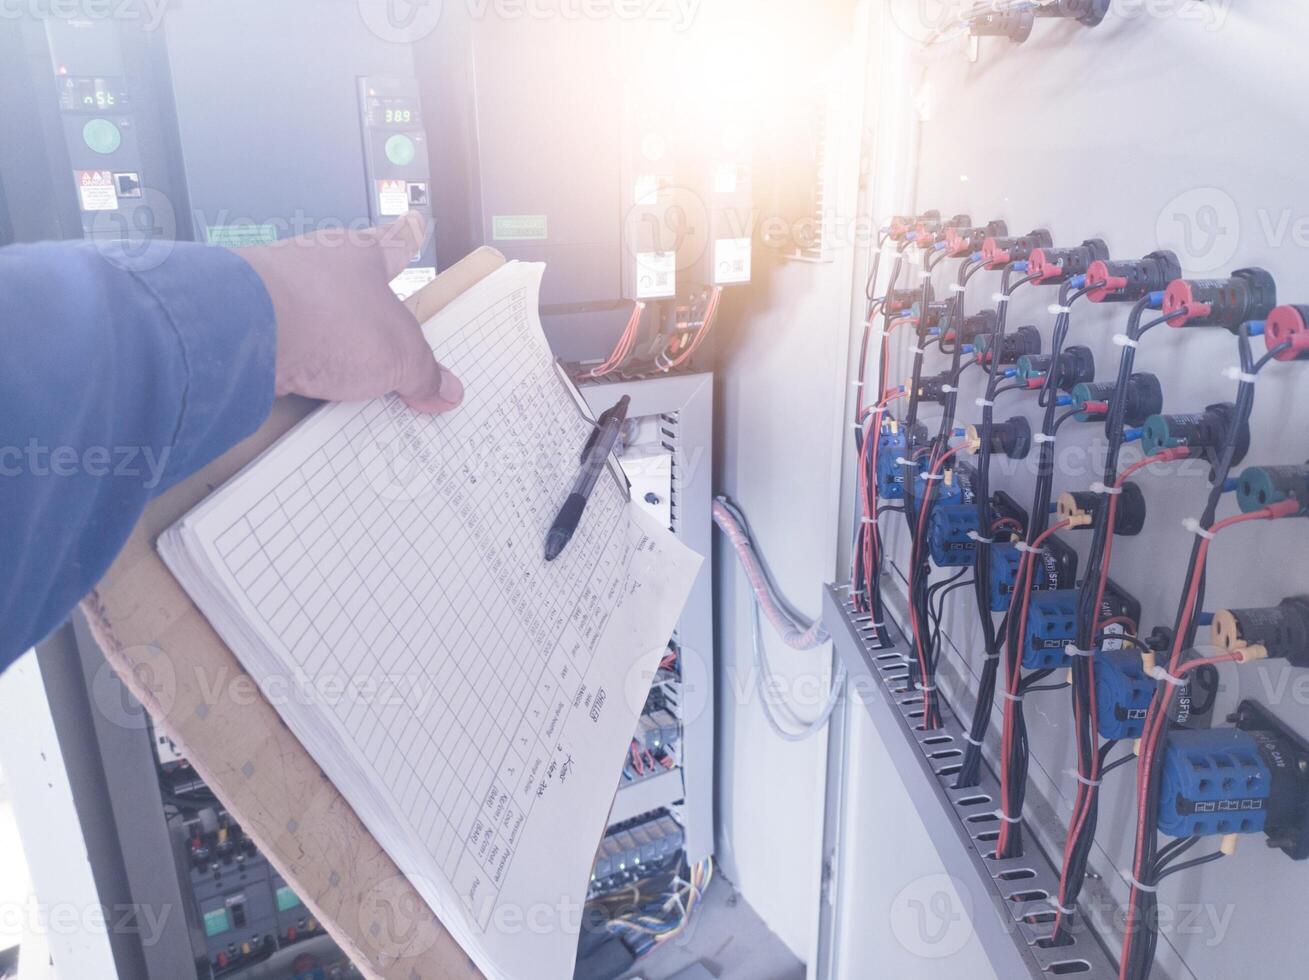 The Electric Enginering checklist and maintenance electric panel in power house.preventive maintenance schedule for electrical panel boards.with shiny light. photo